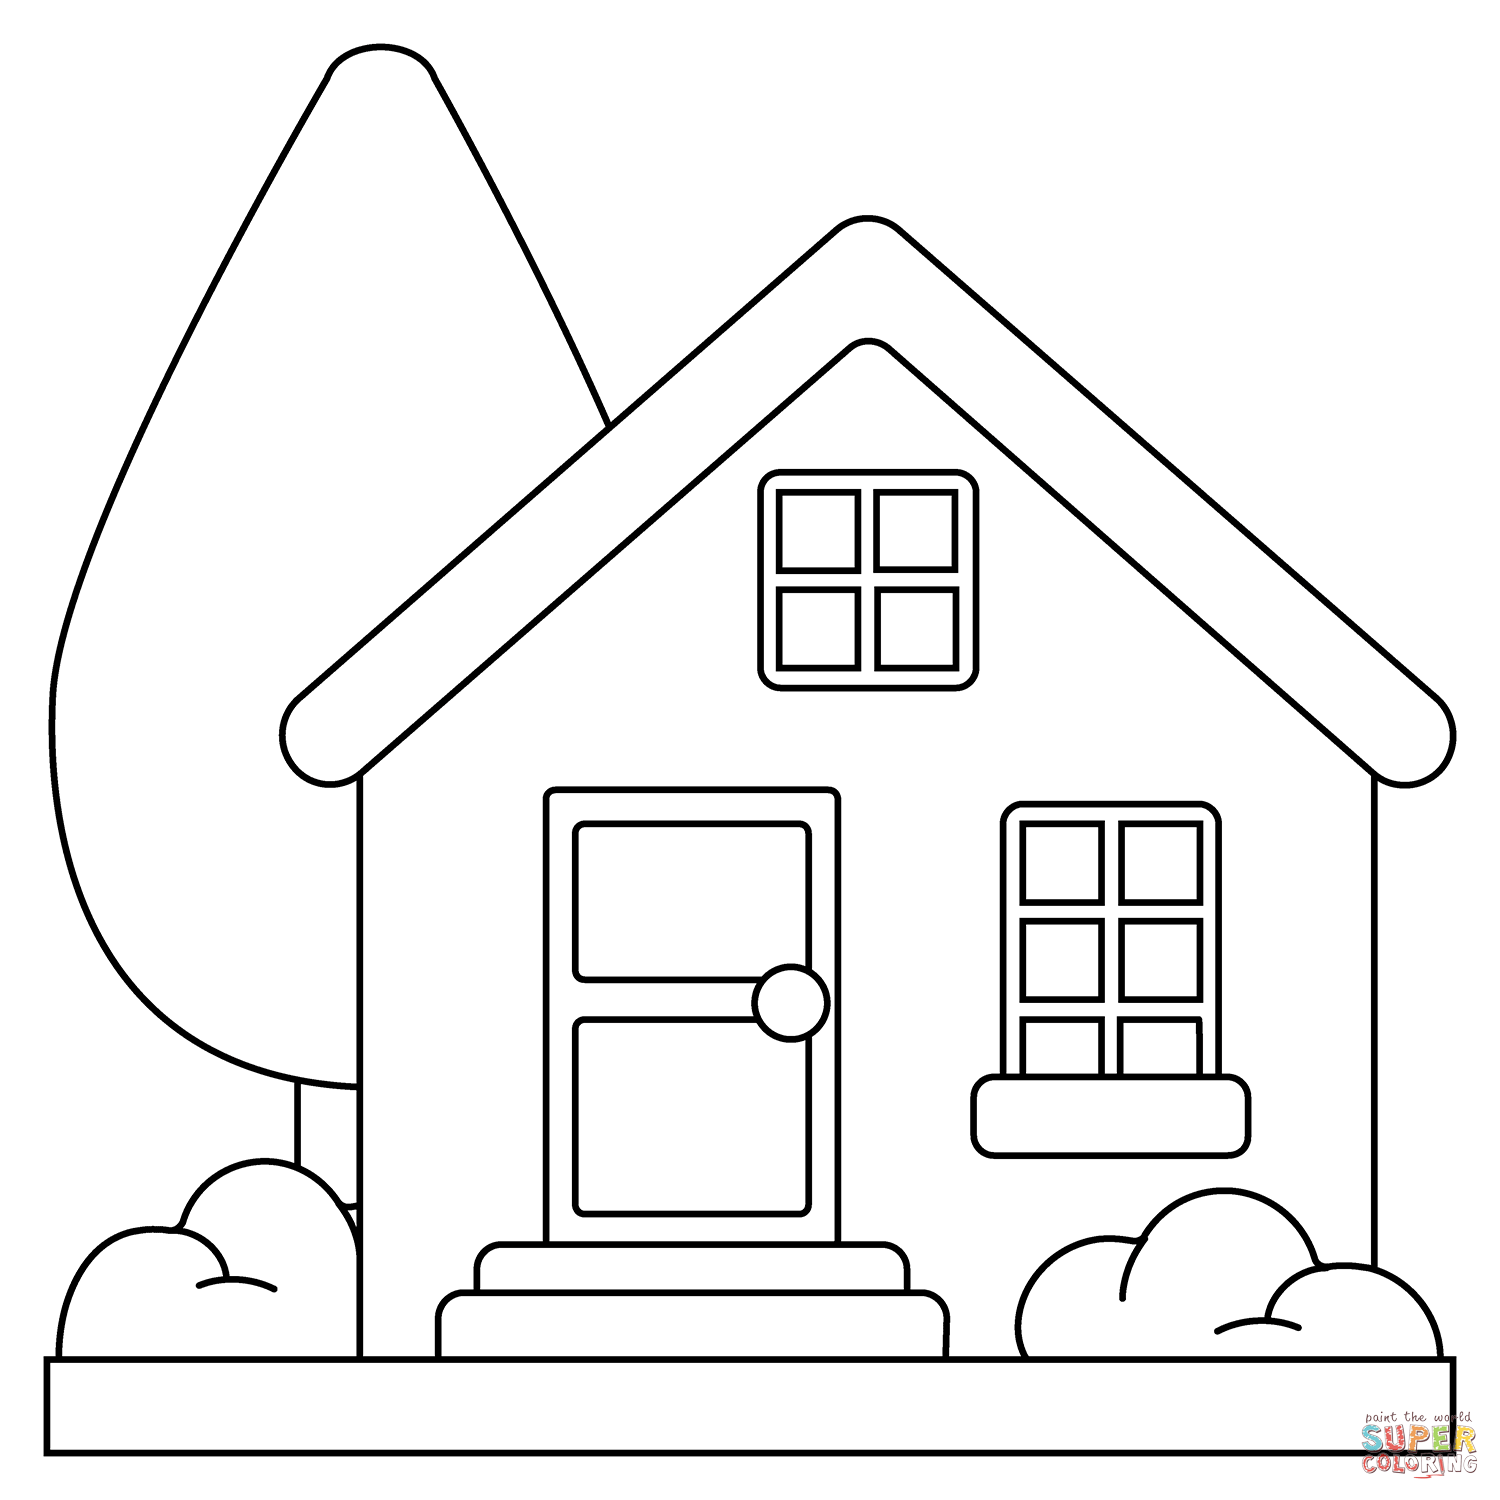 House with garden emoji coloring page free printable coloring pages